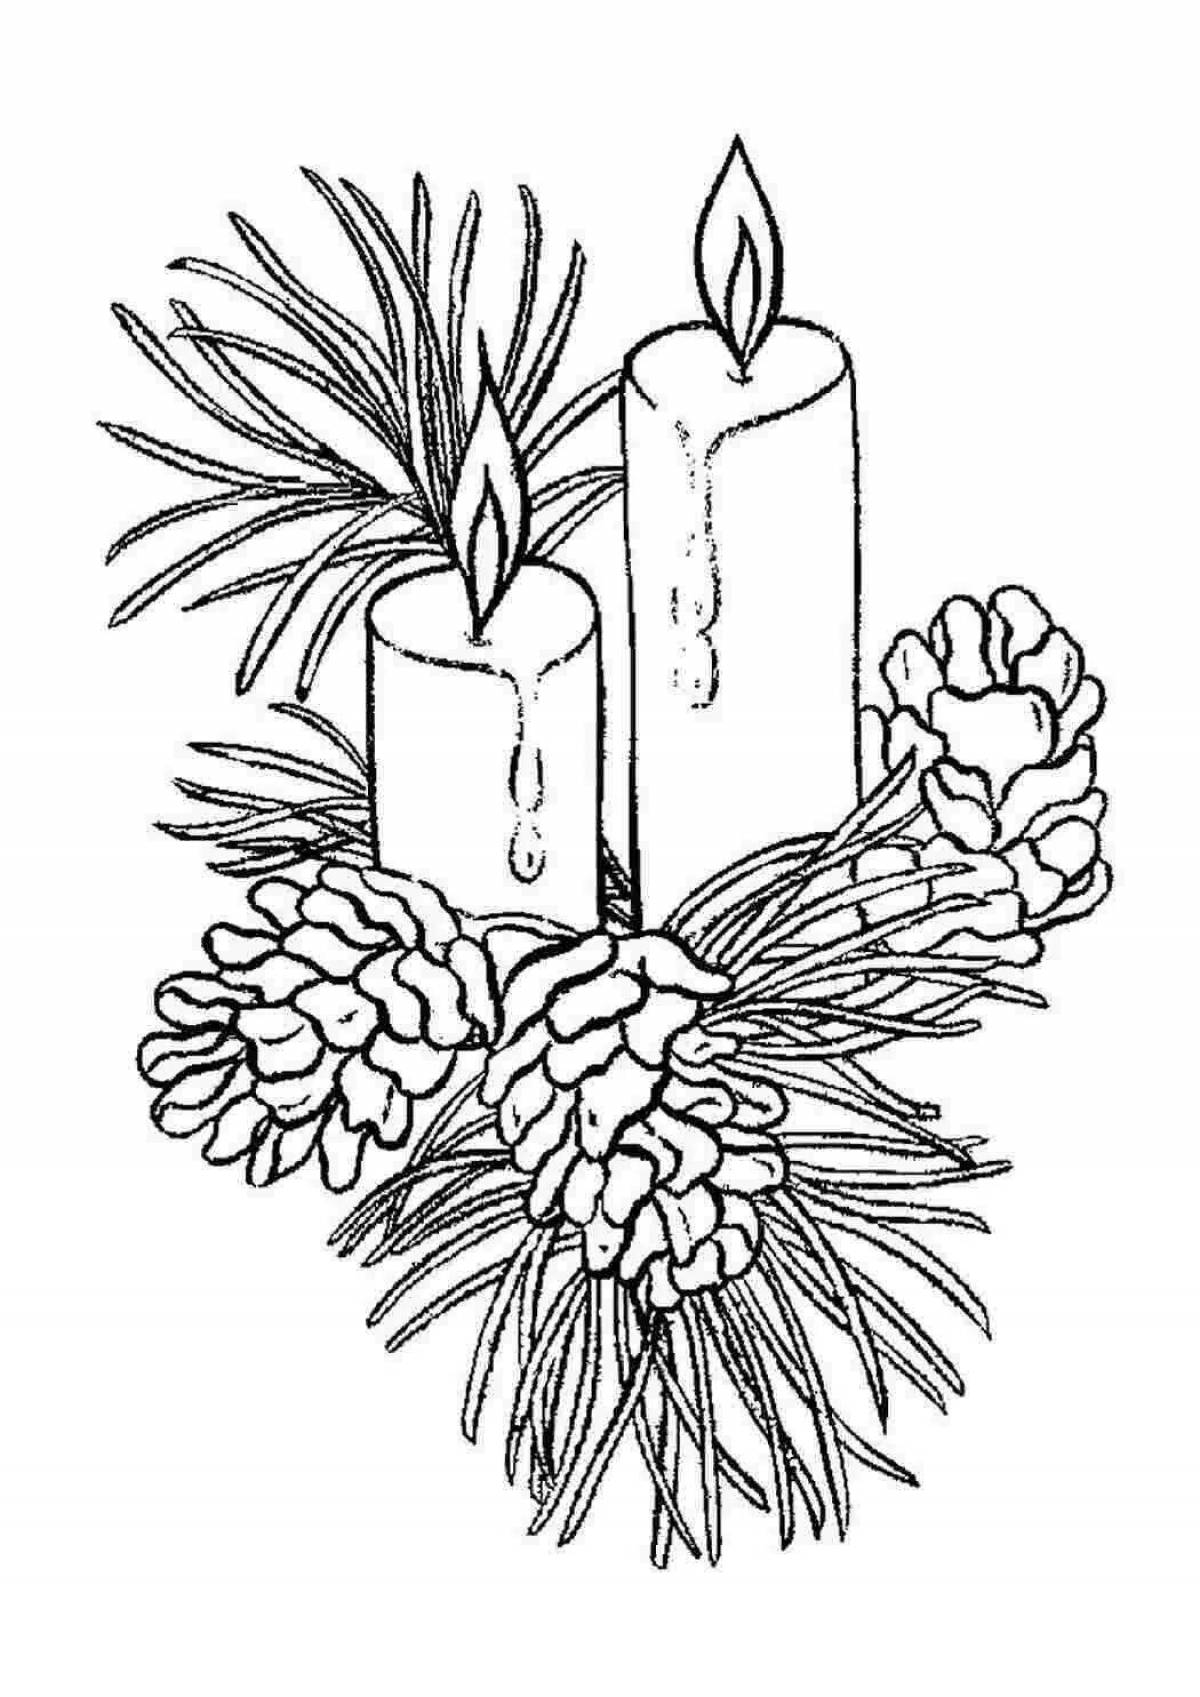 Coloring book soothing winter still life